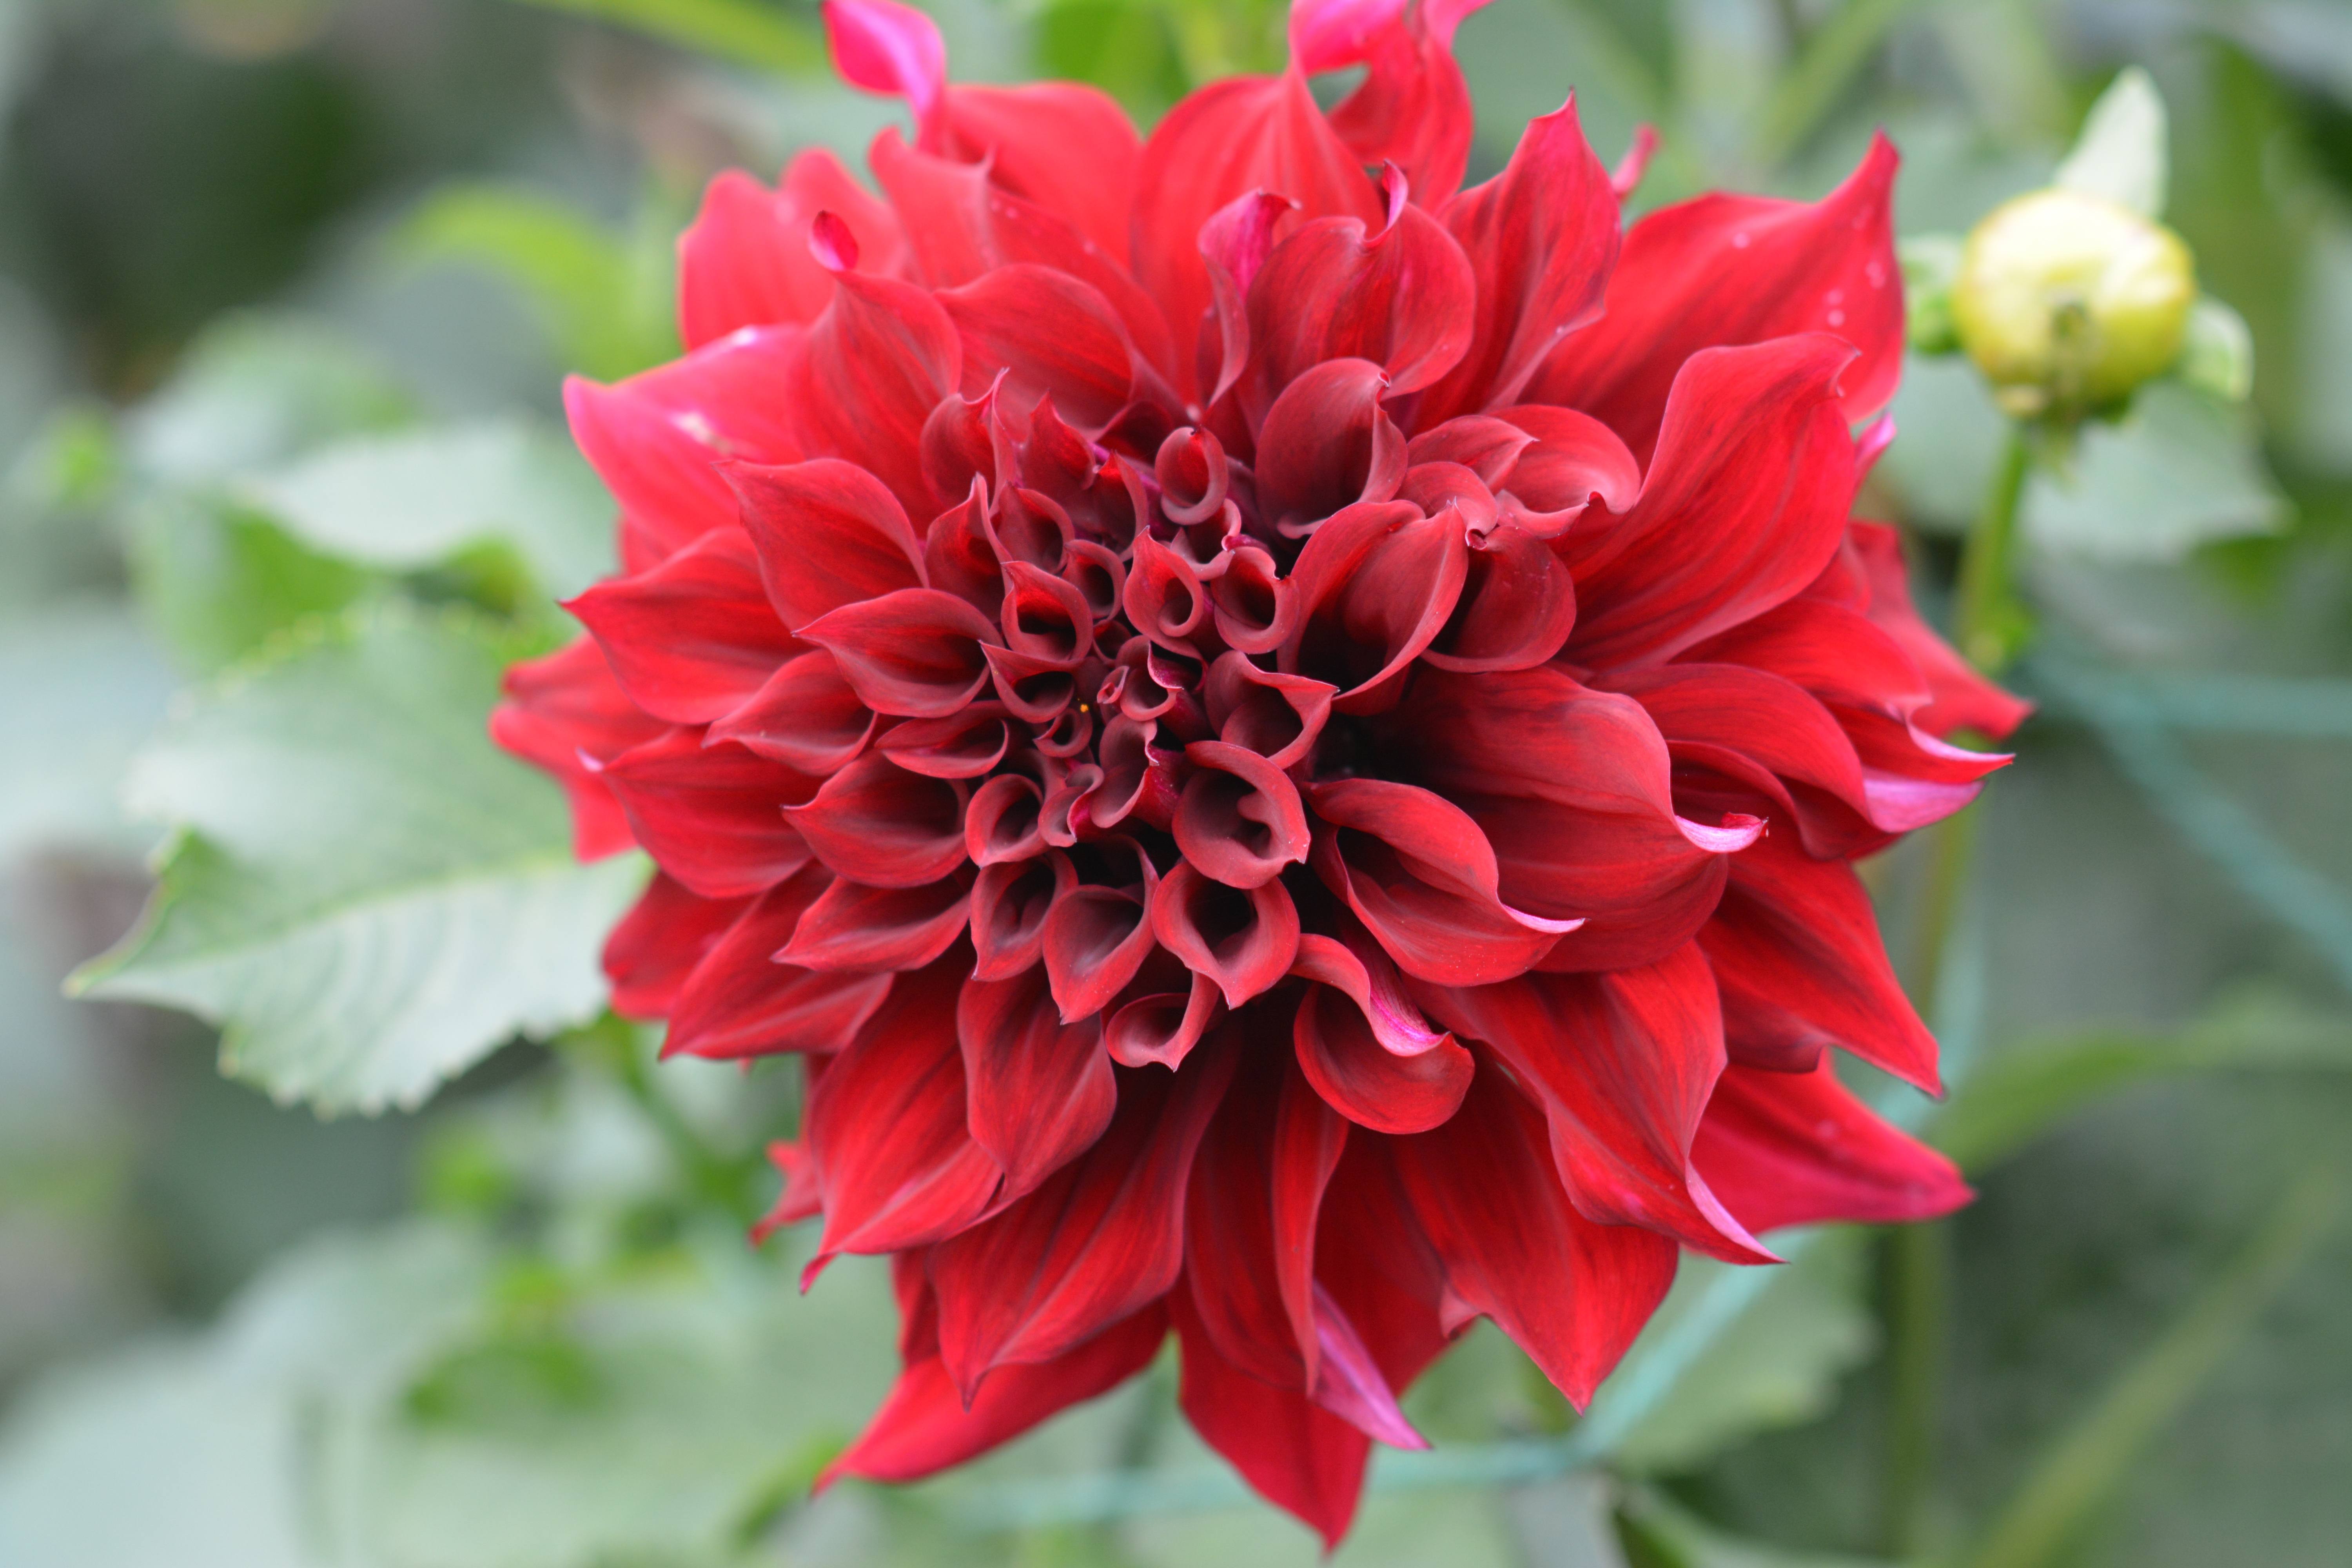 NATURAL BEAUTY – Red Deerians can expect to see many beautiful decorative dahlias such as this one at the upcoming Dahlia and Gladiolus show this weekend.